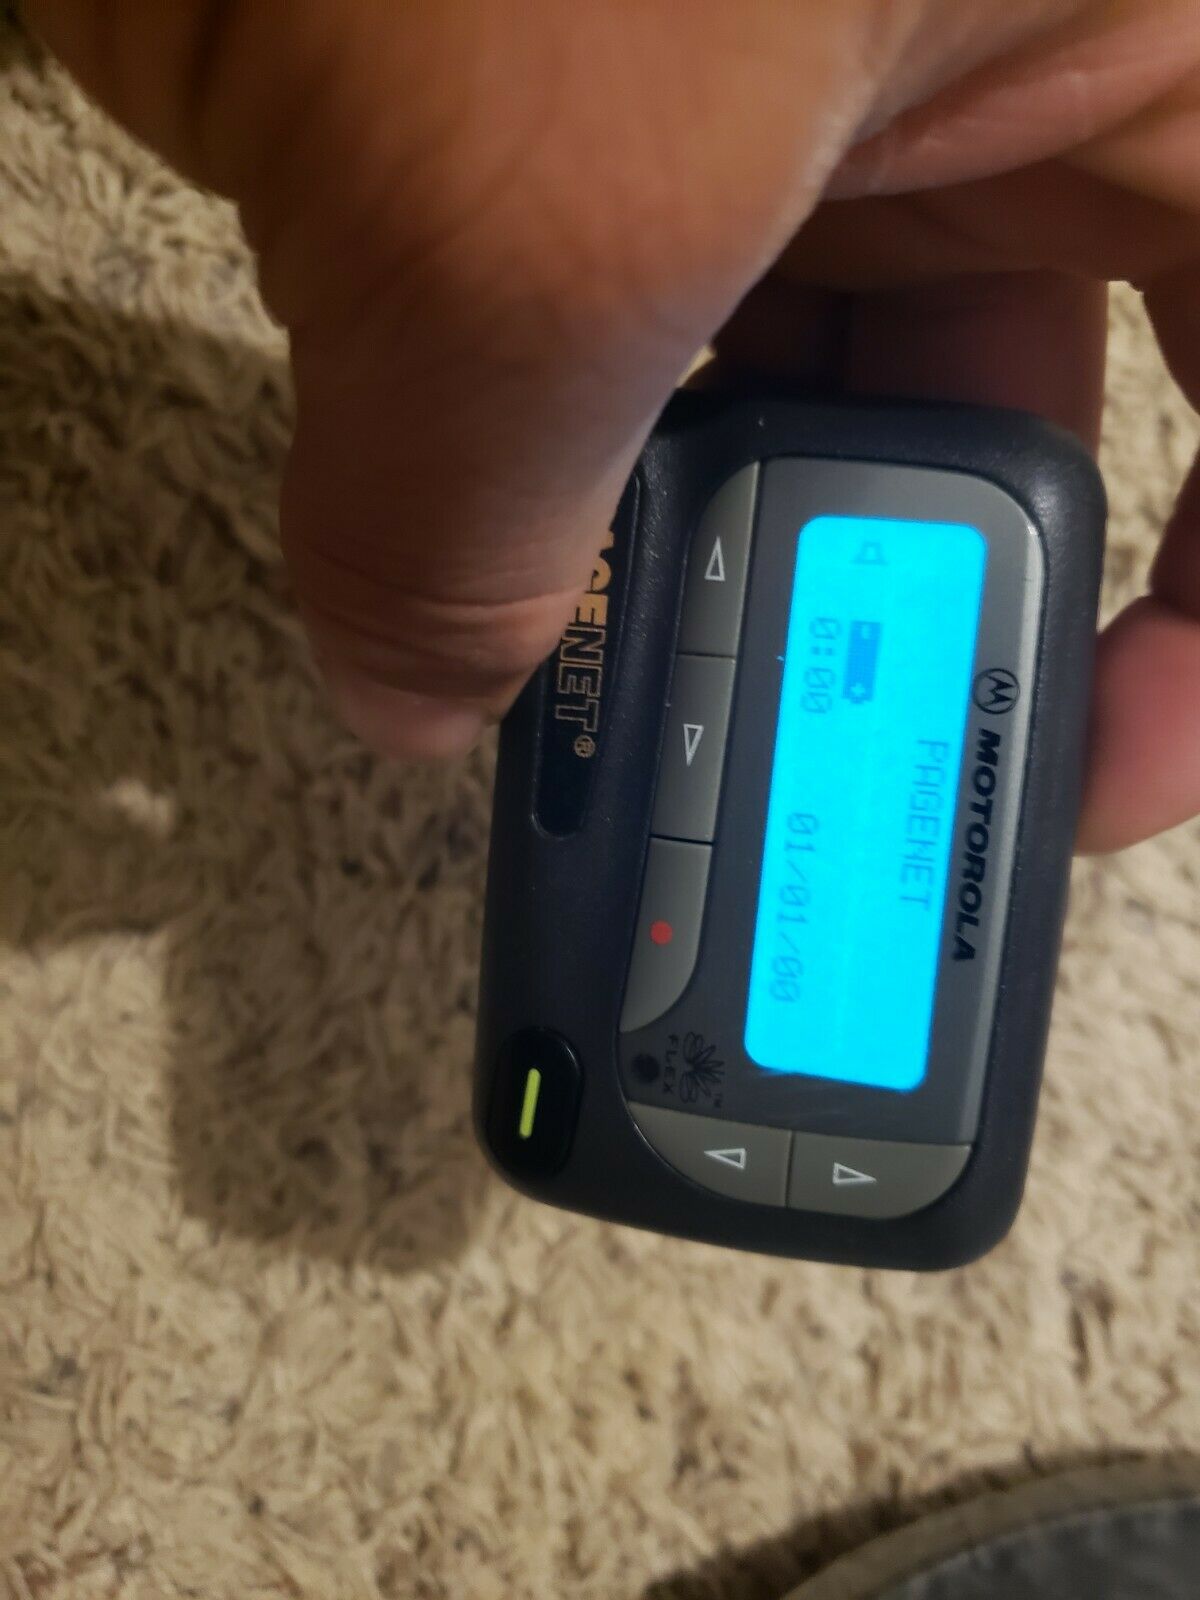 Motorola Flex Pagenet Beeper Pager Tested Working Condition With Case Clip